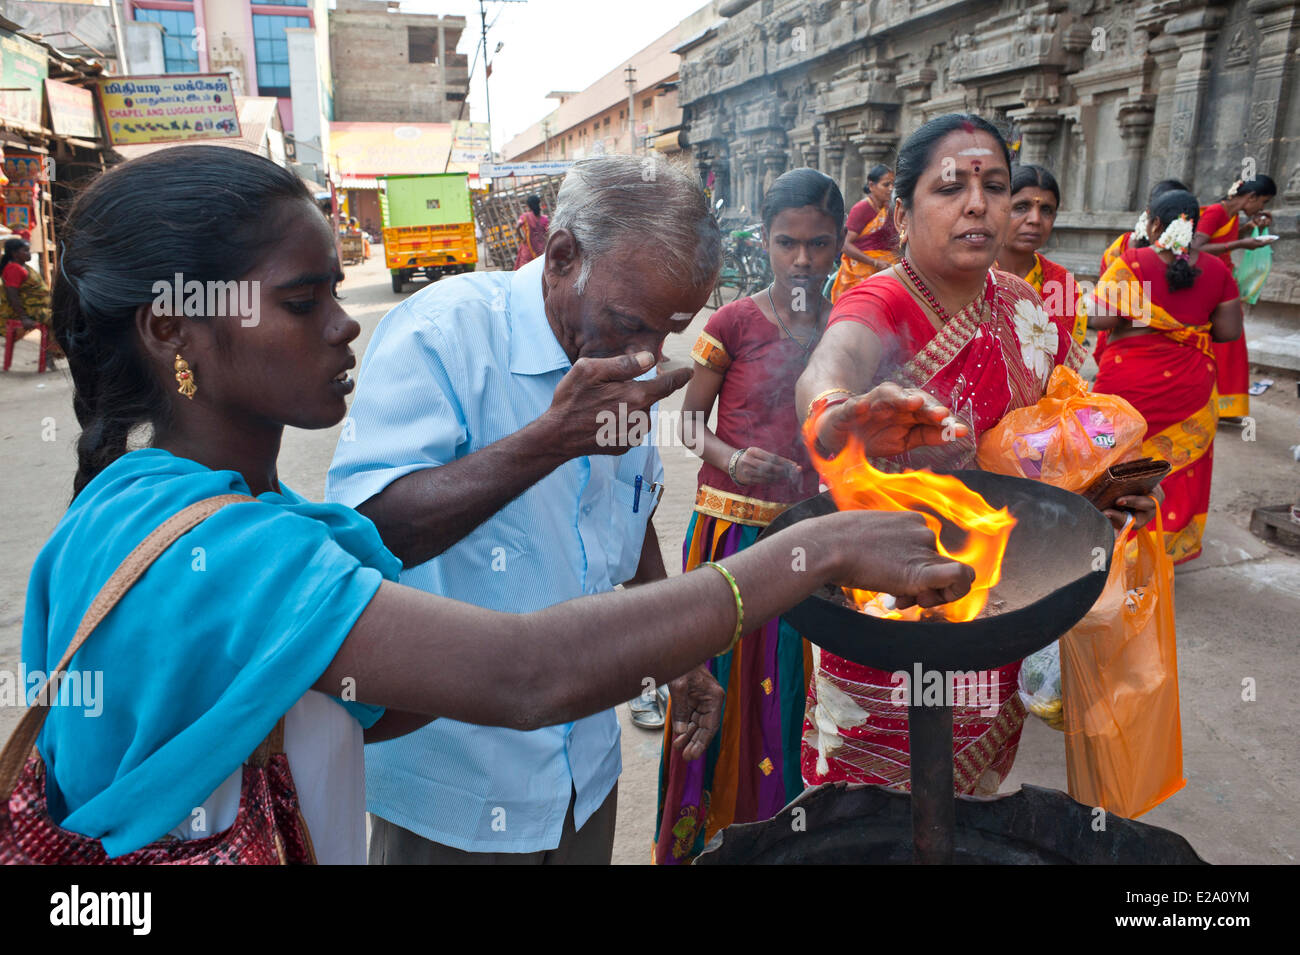 India, Tamil Nadu state, Tiruvannamalai, Arunachaleswarar temple where Shiva is worshiped in the form of fire, is an important Stock Photo